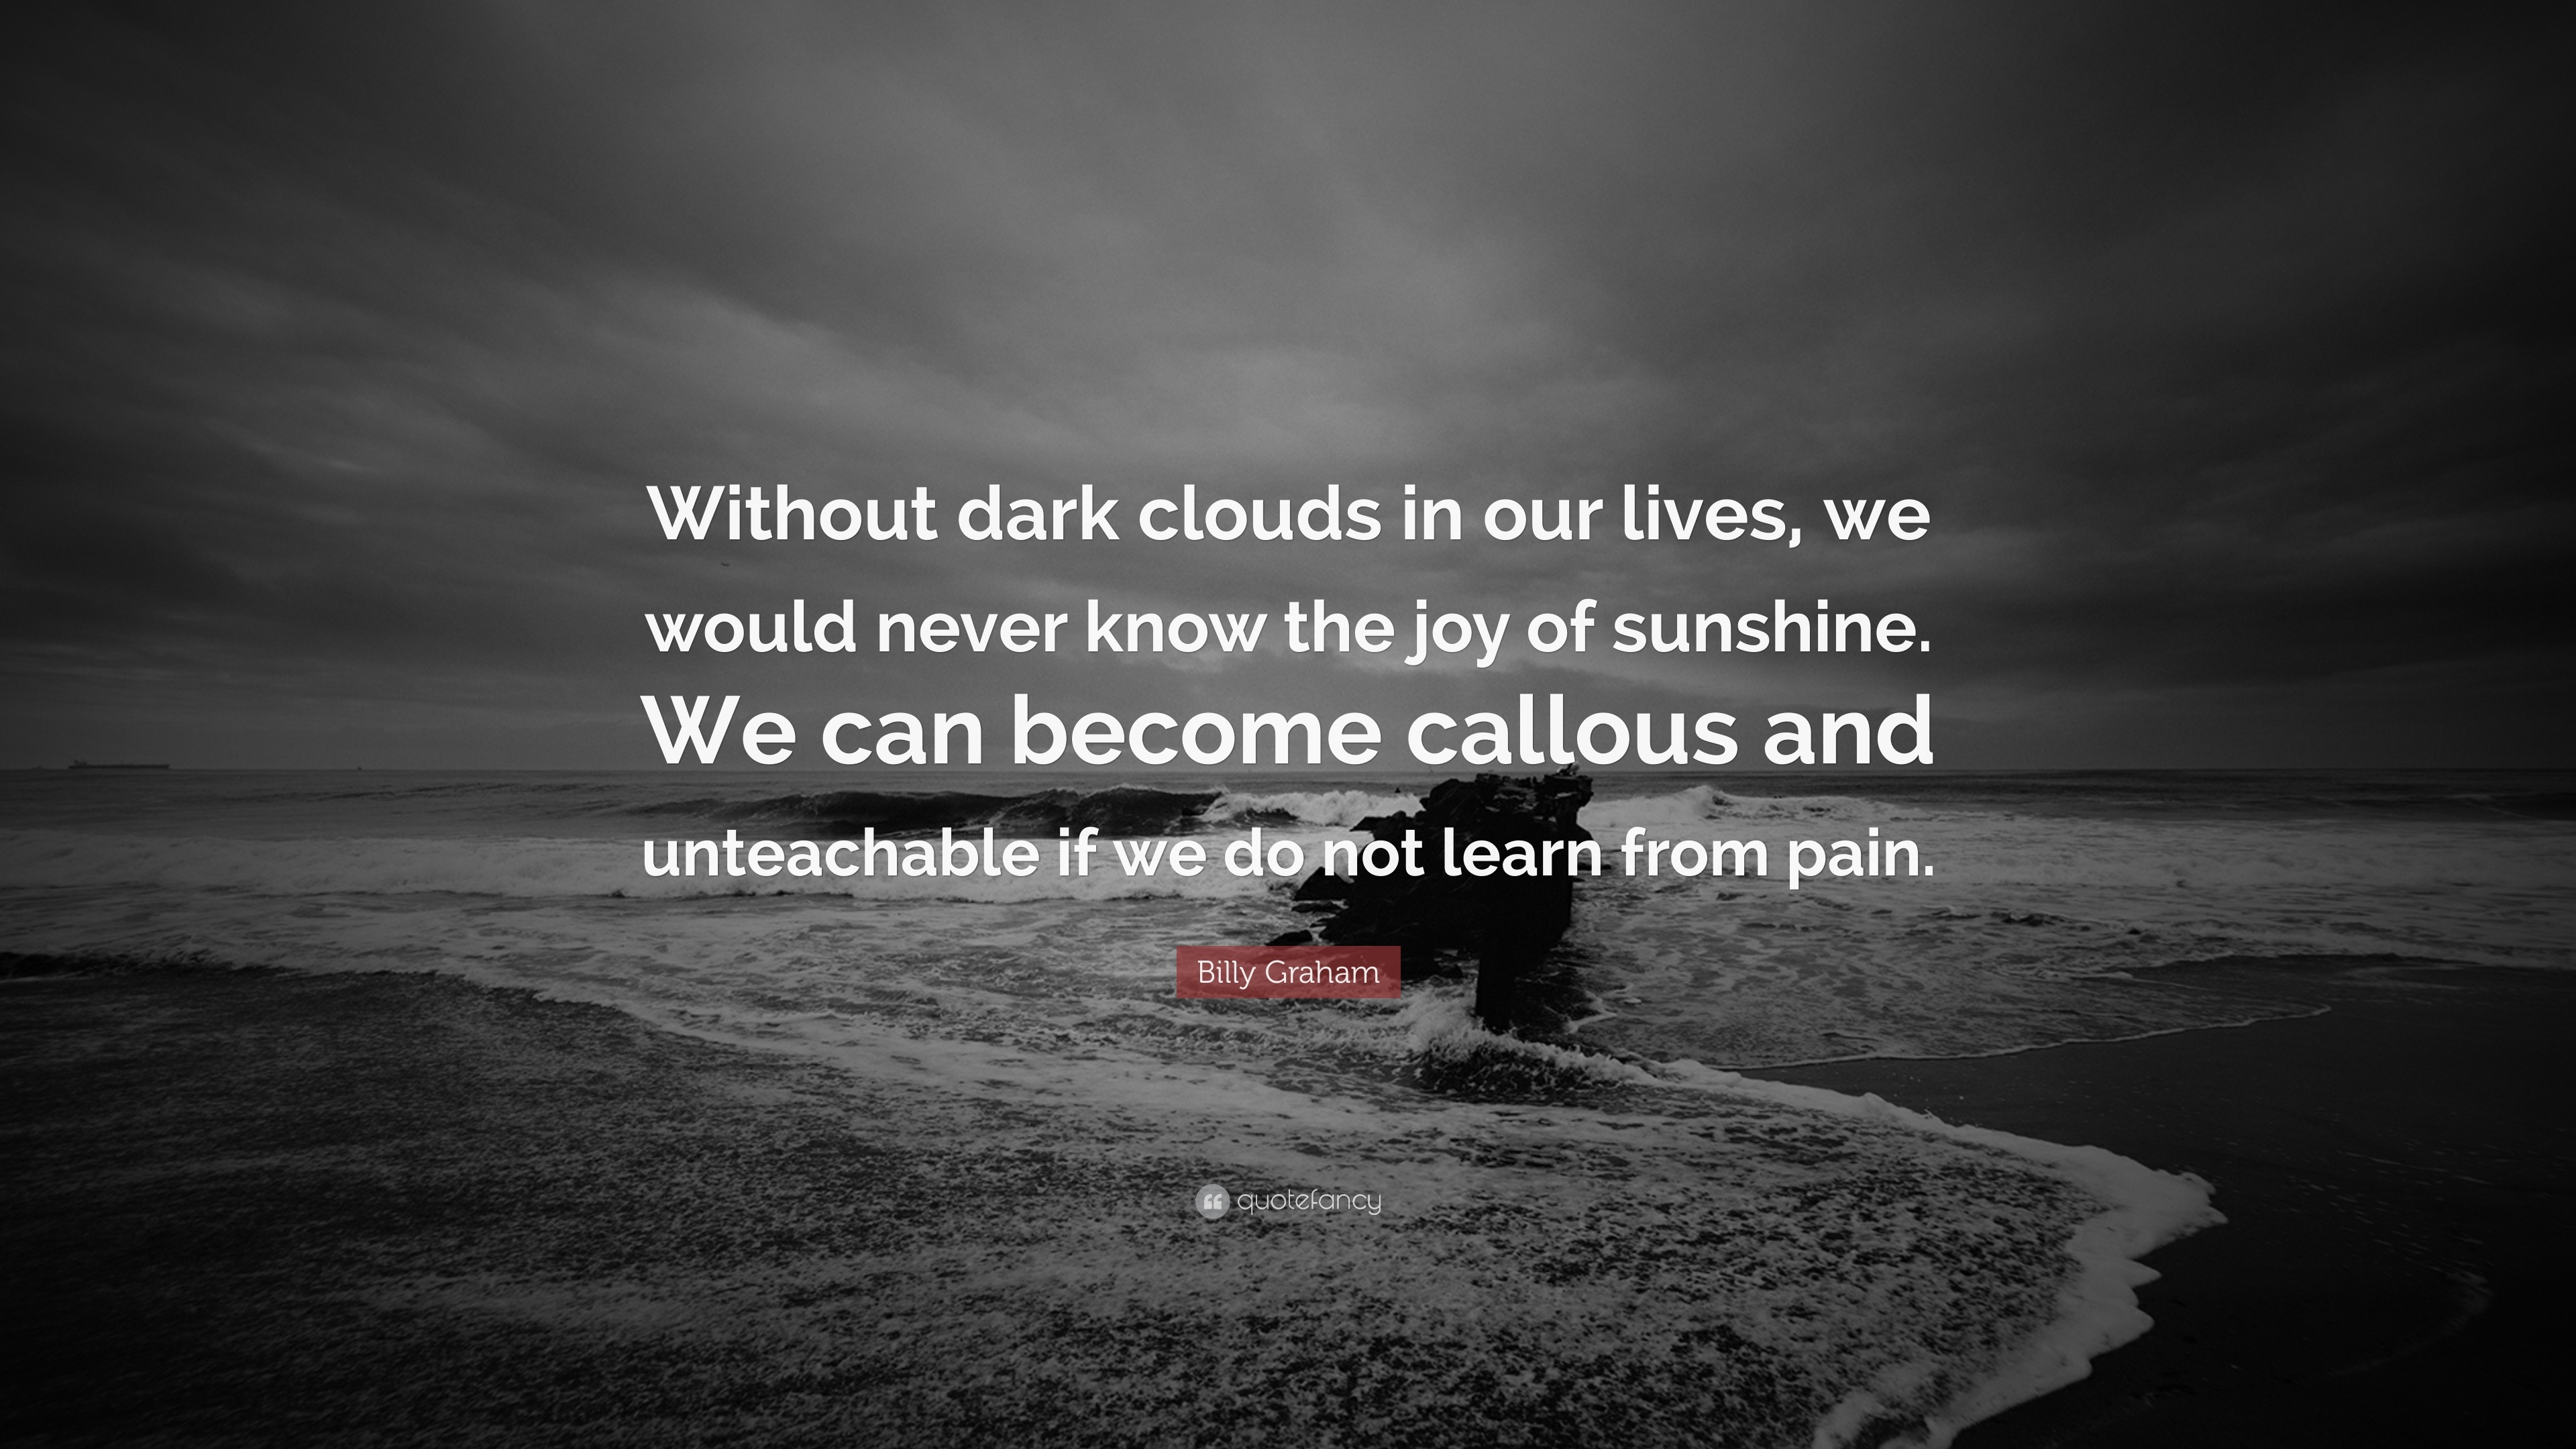 Billy Graham Quote: “Without dark clouds in our lives, we would never ...